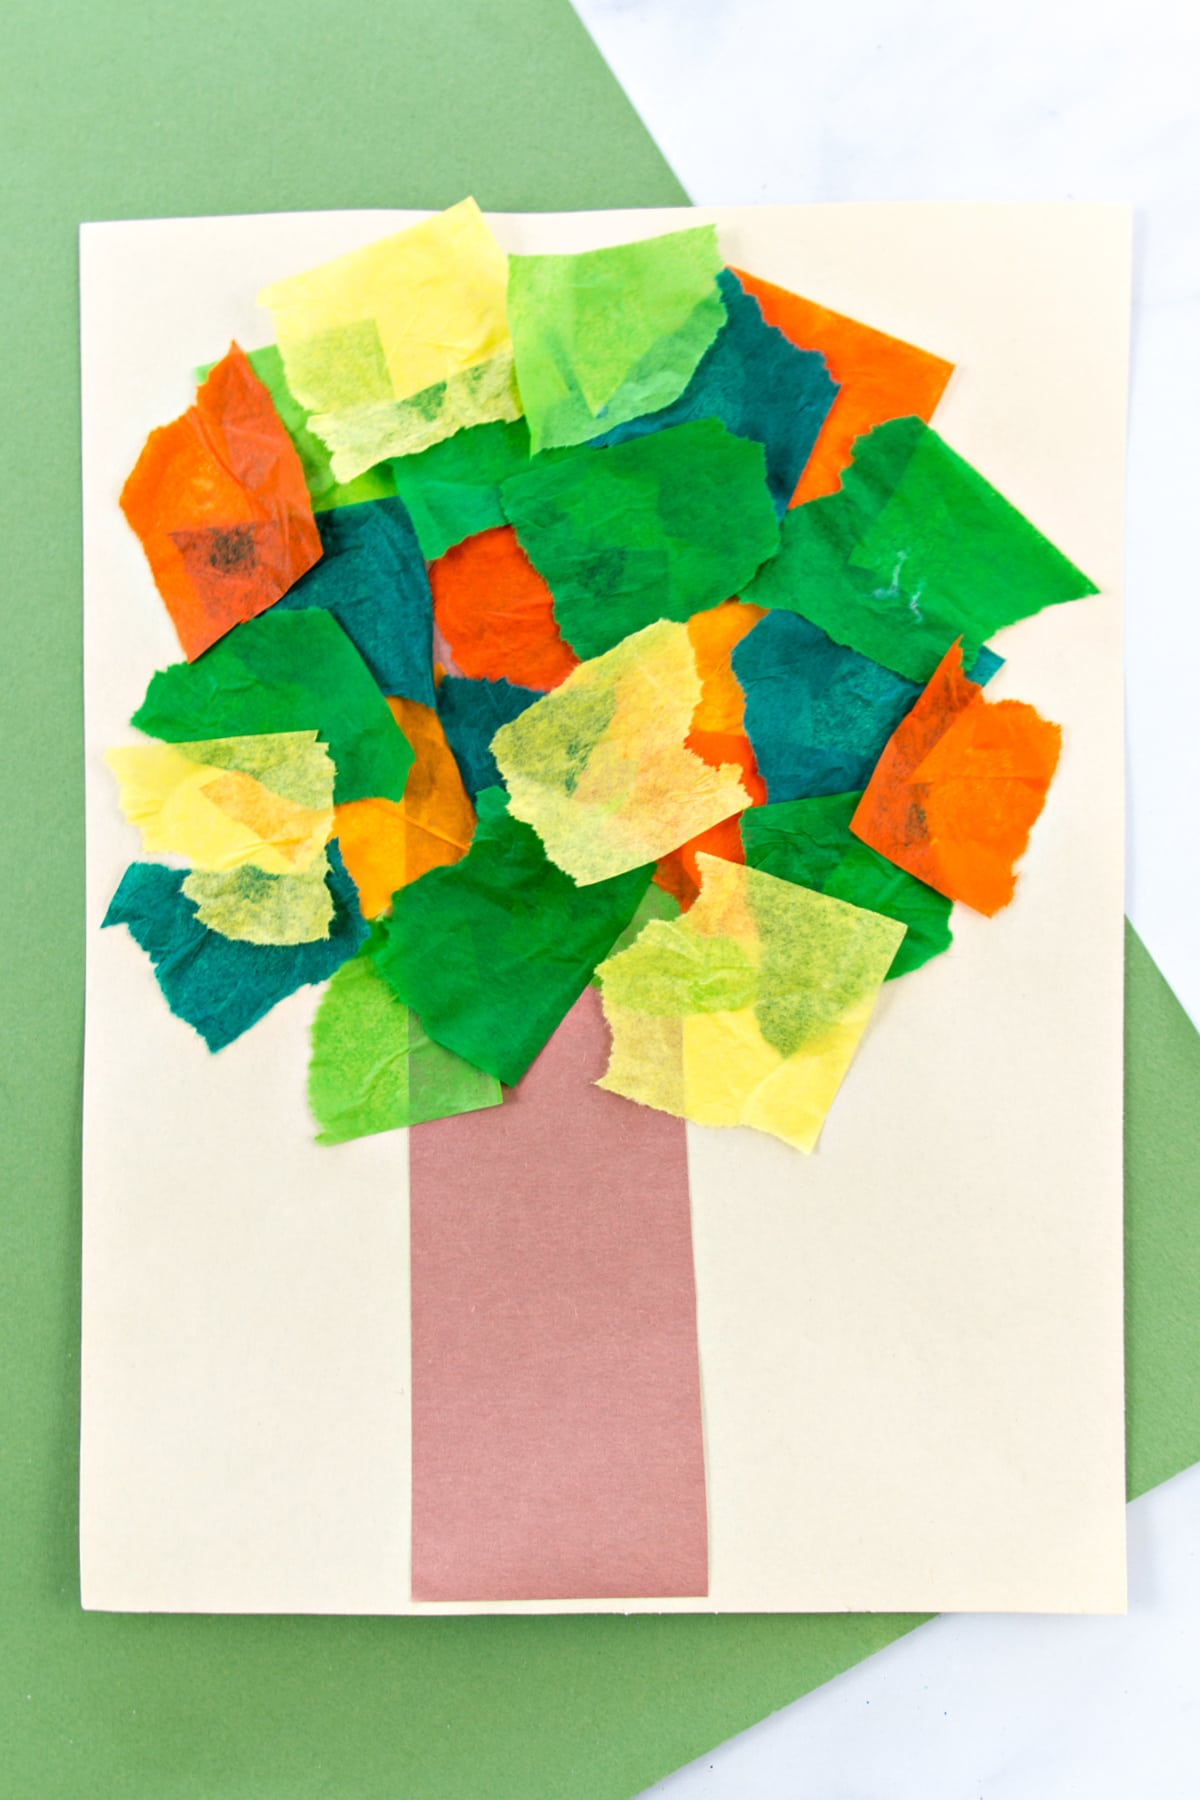 Fall tree craft for preschoolers using brown construction paper and colorful tissue paper